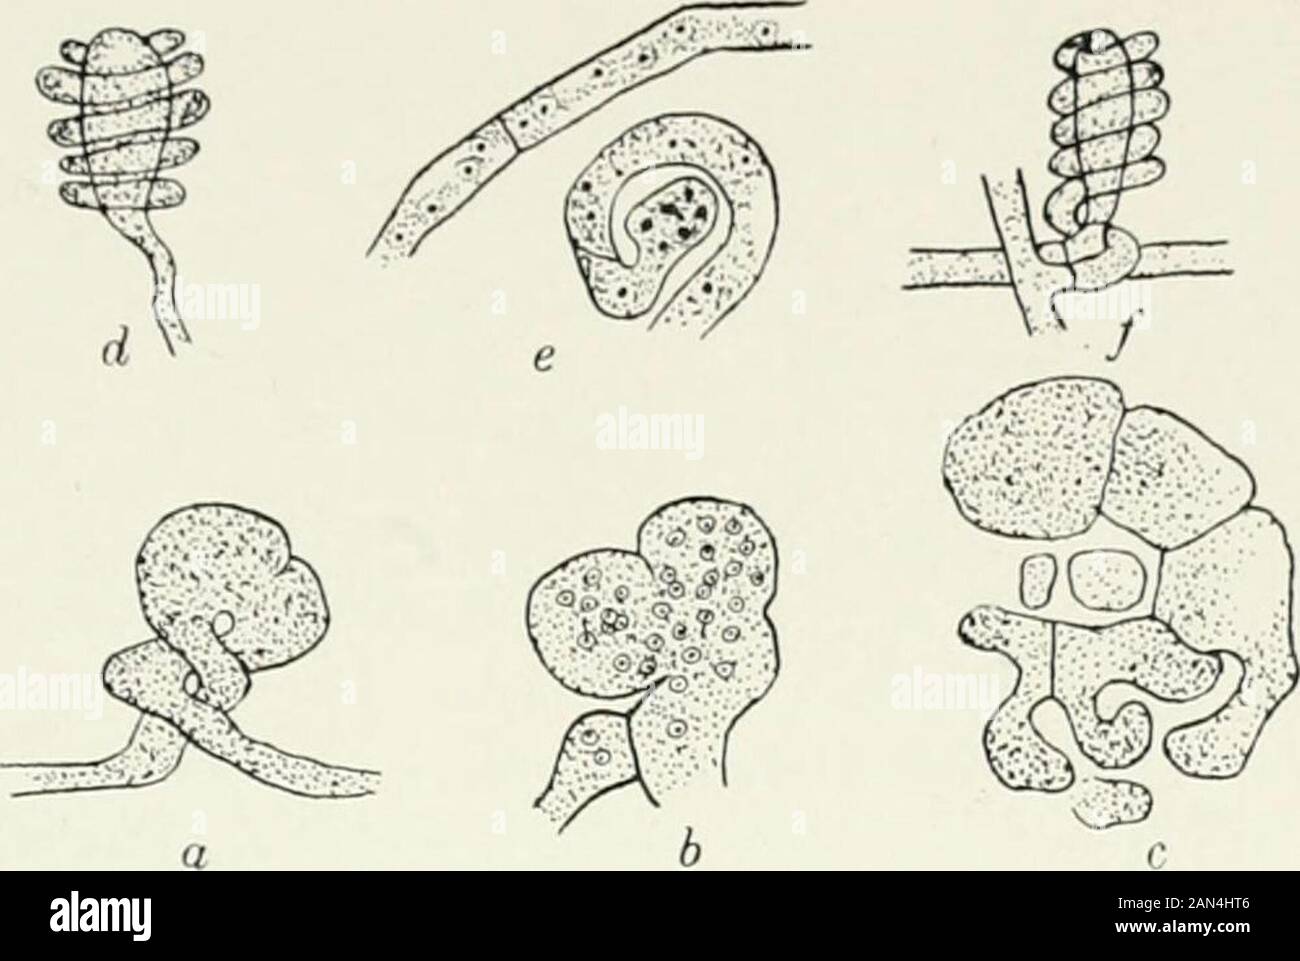 Fungi, Ascomycetes, Ustilaginales, Uredinales . Fi 26. Gymnoascus sp.; a. ascocarp, x 26;b. ascus and free ascospores, x 1040. tn] PLECTASCALES 67 In G. candidus (fig.27 d) the antheridium and oogonium already differin form at the time of their union, and, in the majority of cases, appear to. Fig. 2j. Gymnoascus Reesii Baran.; a. surface view of conjugating cells;b. the same in longitudinal section; c. a later stage, septate oogoniumgiving rise t hyphae; Gymnoascus candidus Eidam; (/. surface view of conjugating cells; e. same in longitudinal section;all after Dale. Ctenomyces serratus Eidam; Stock Photo